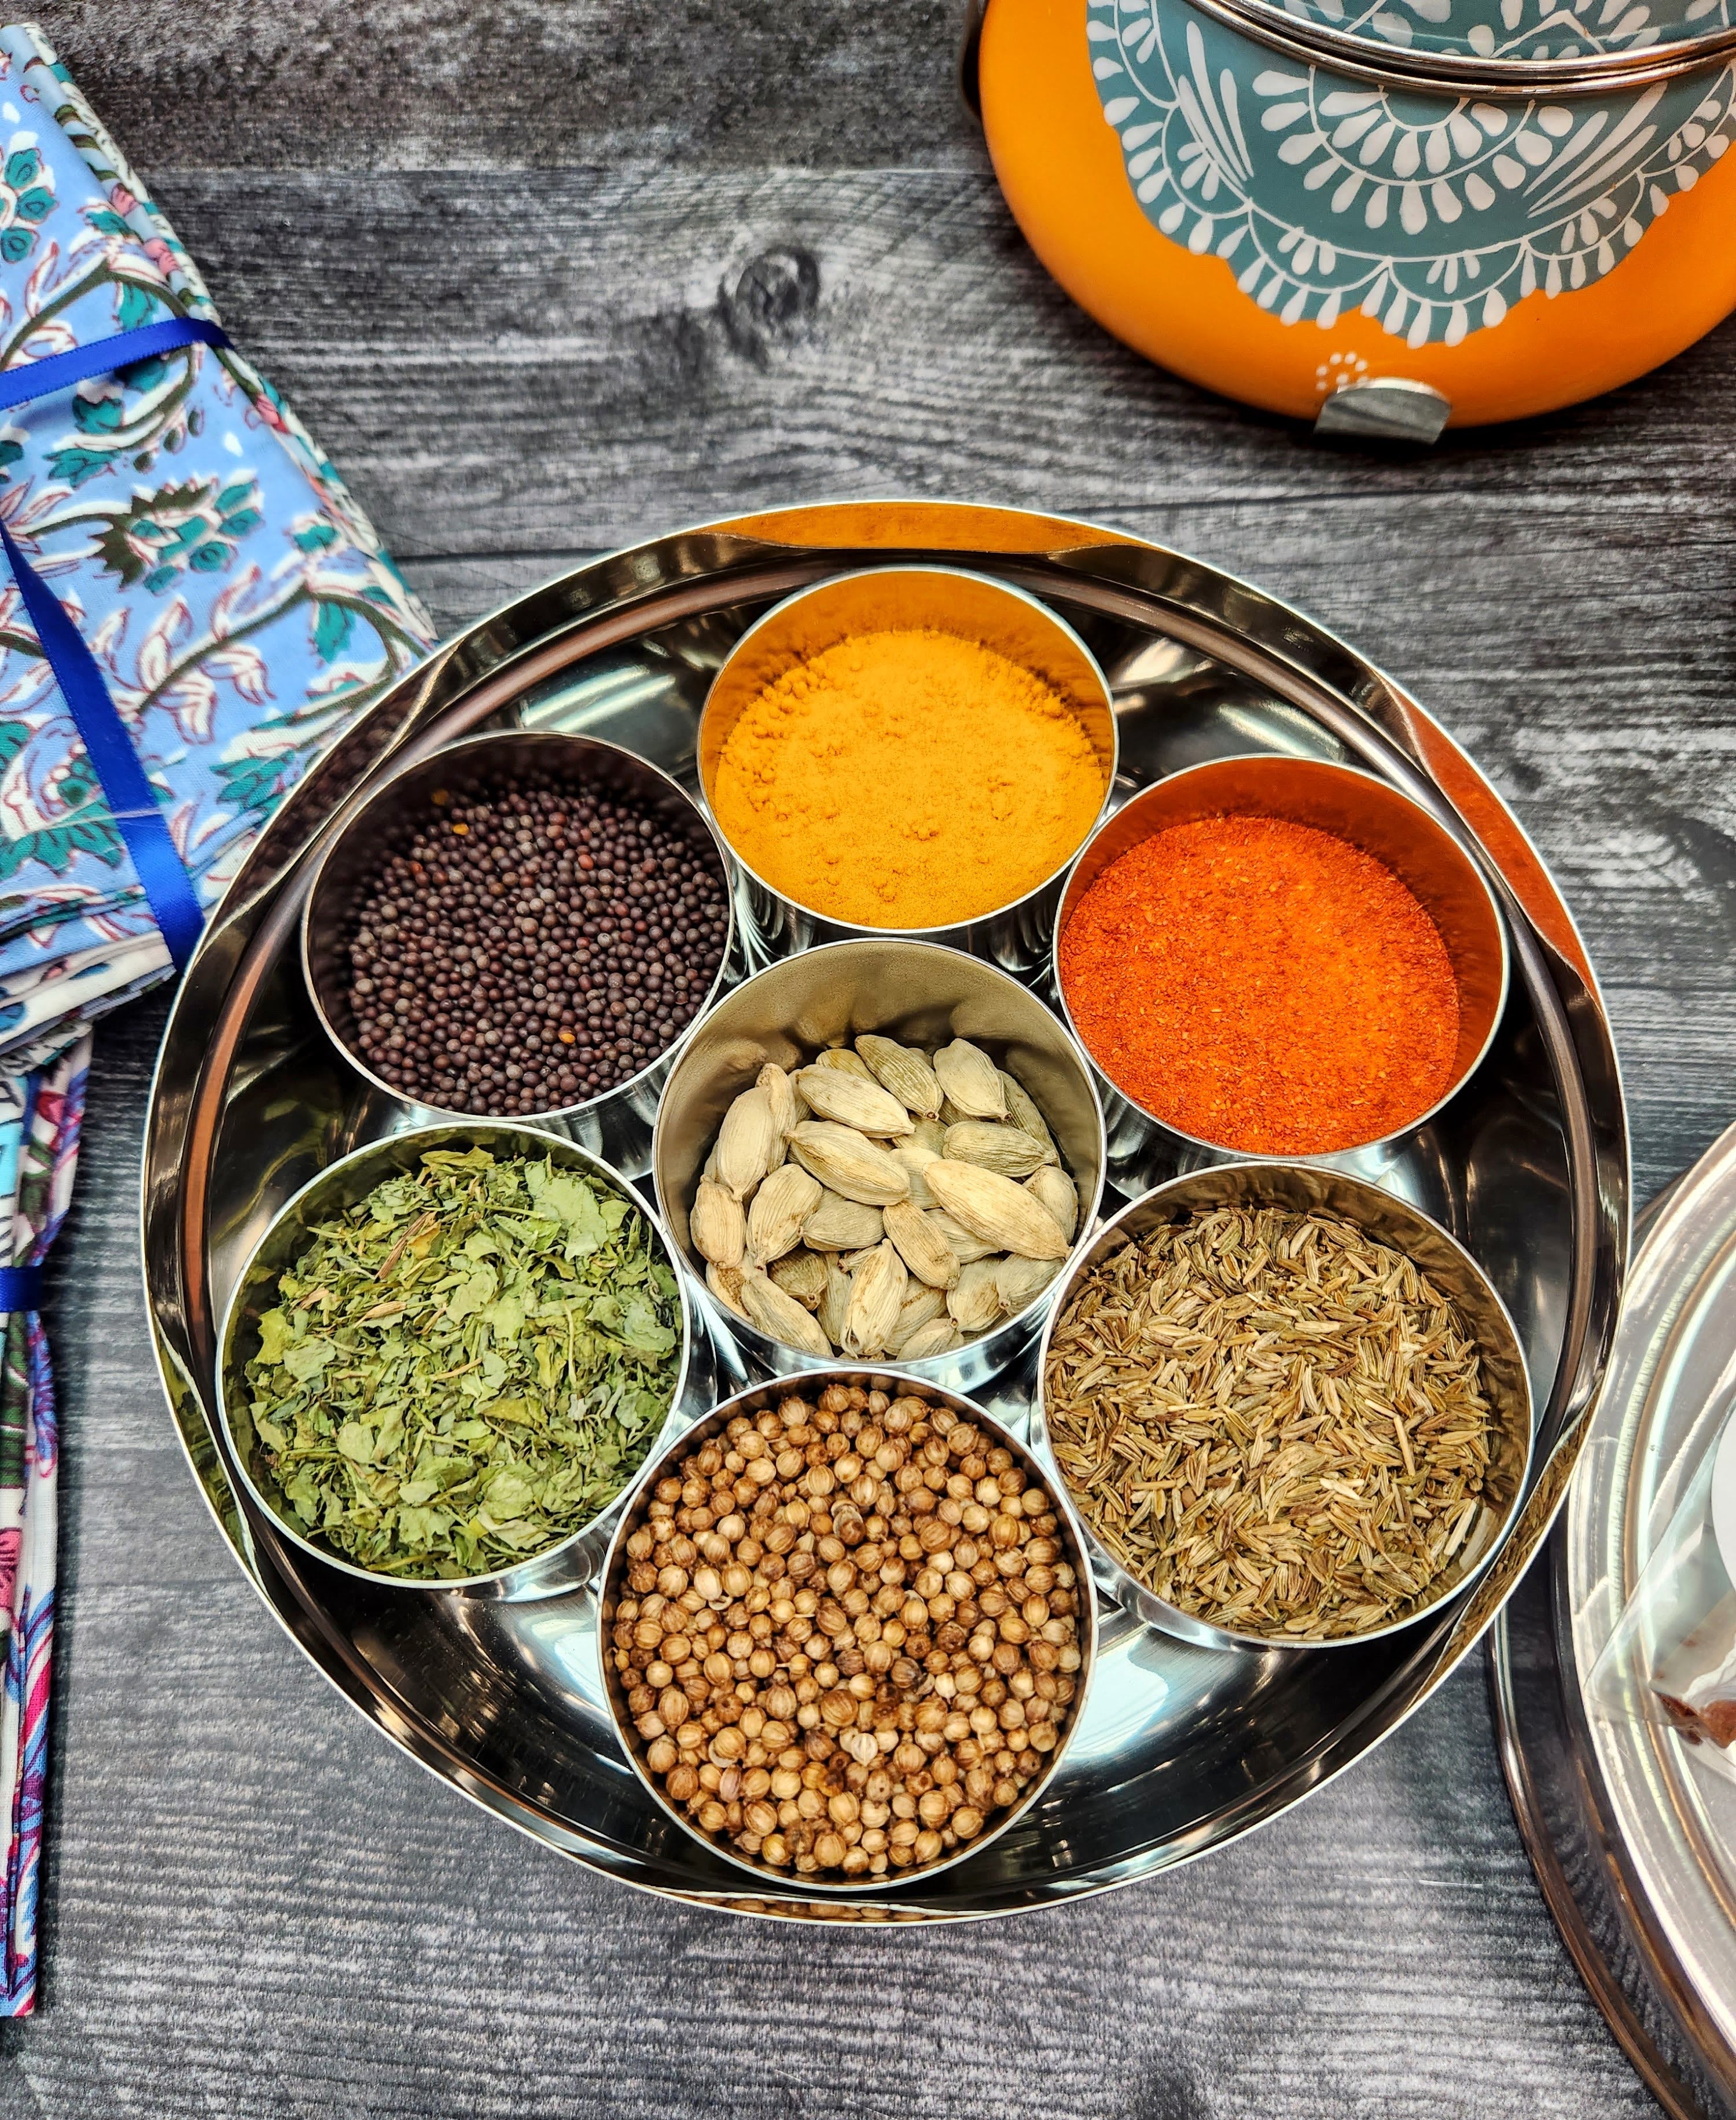 Buy Indian Spices Gift Pack Indian Spice Sampler Flavors of India Spice  Kit, Indian Cooking Spice Gift Box for Home Cooks and Chefs Online in India  - Etsy